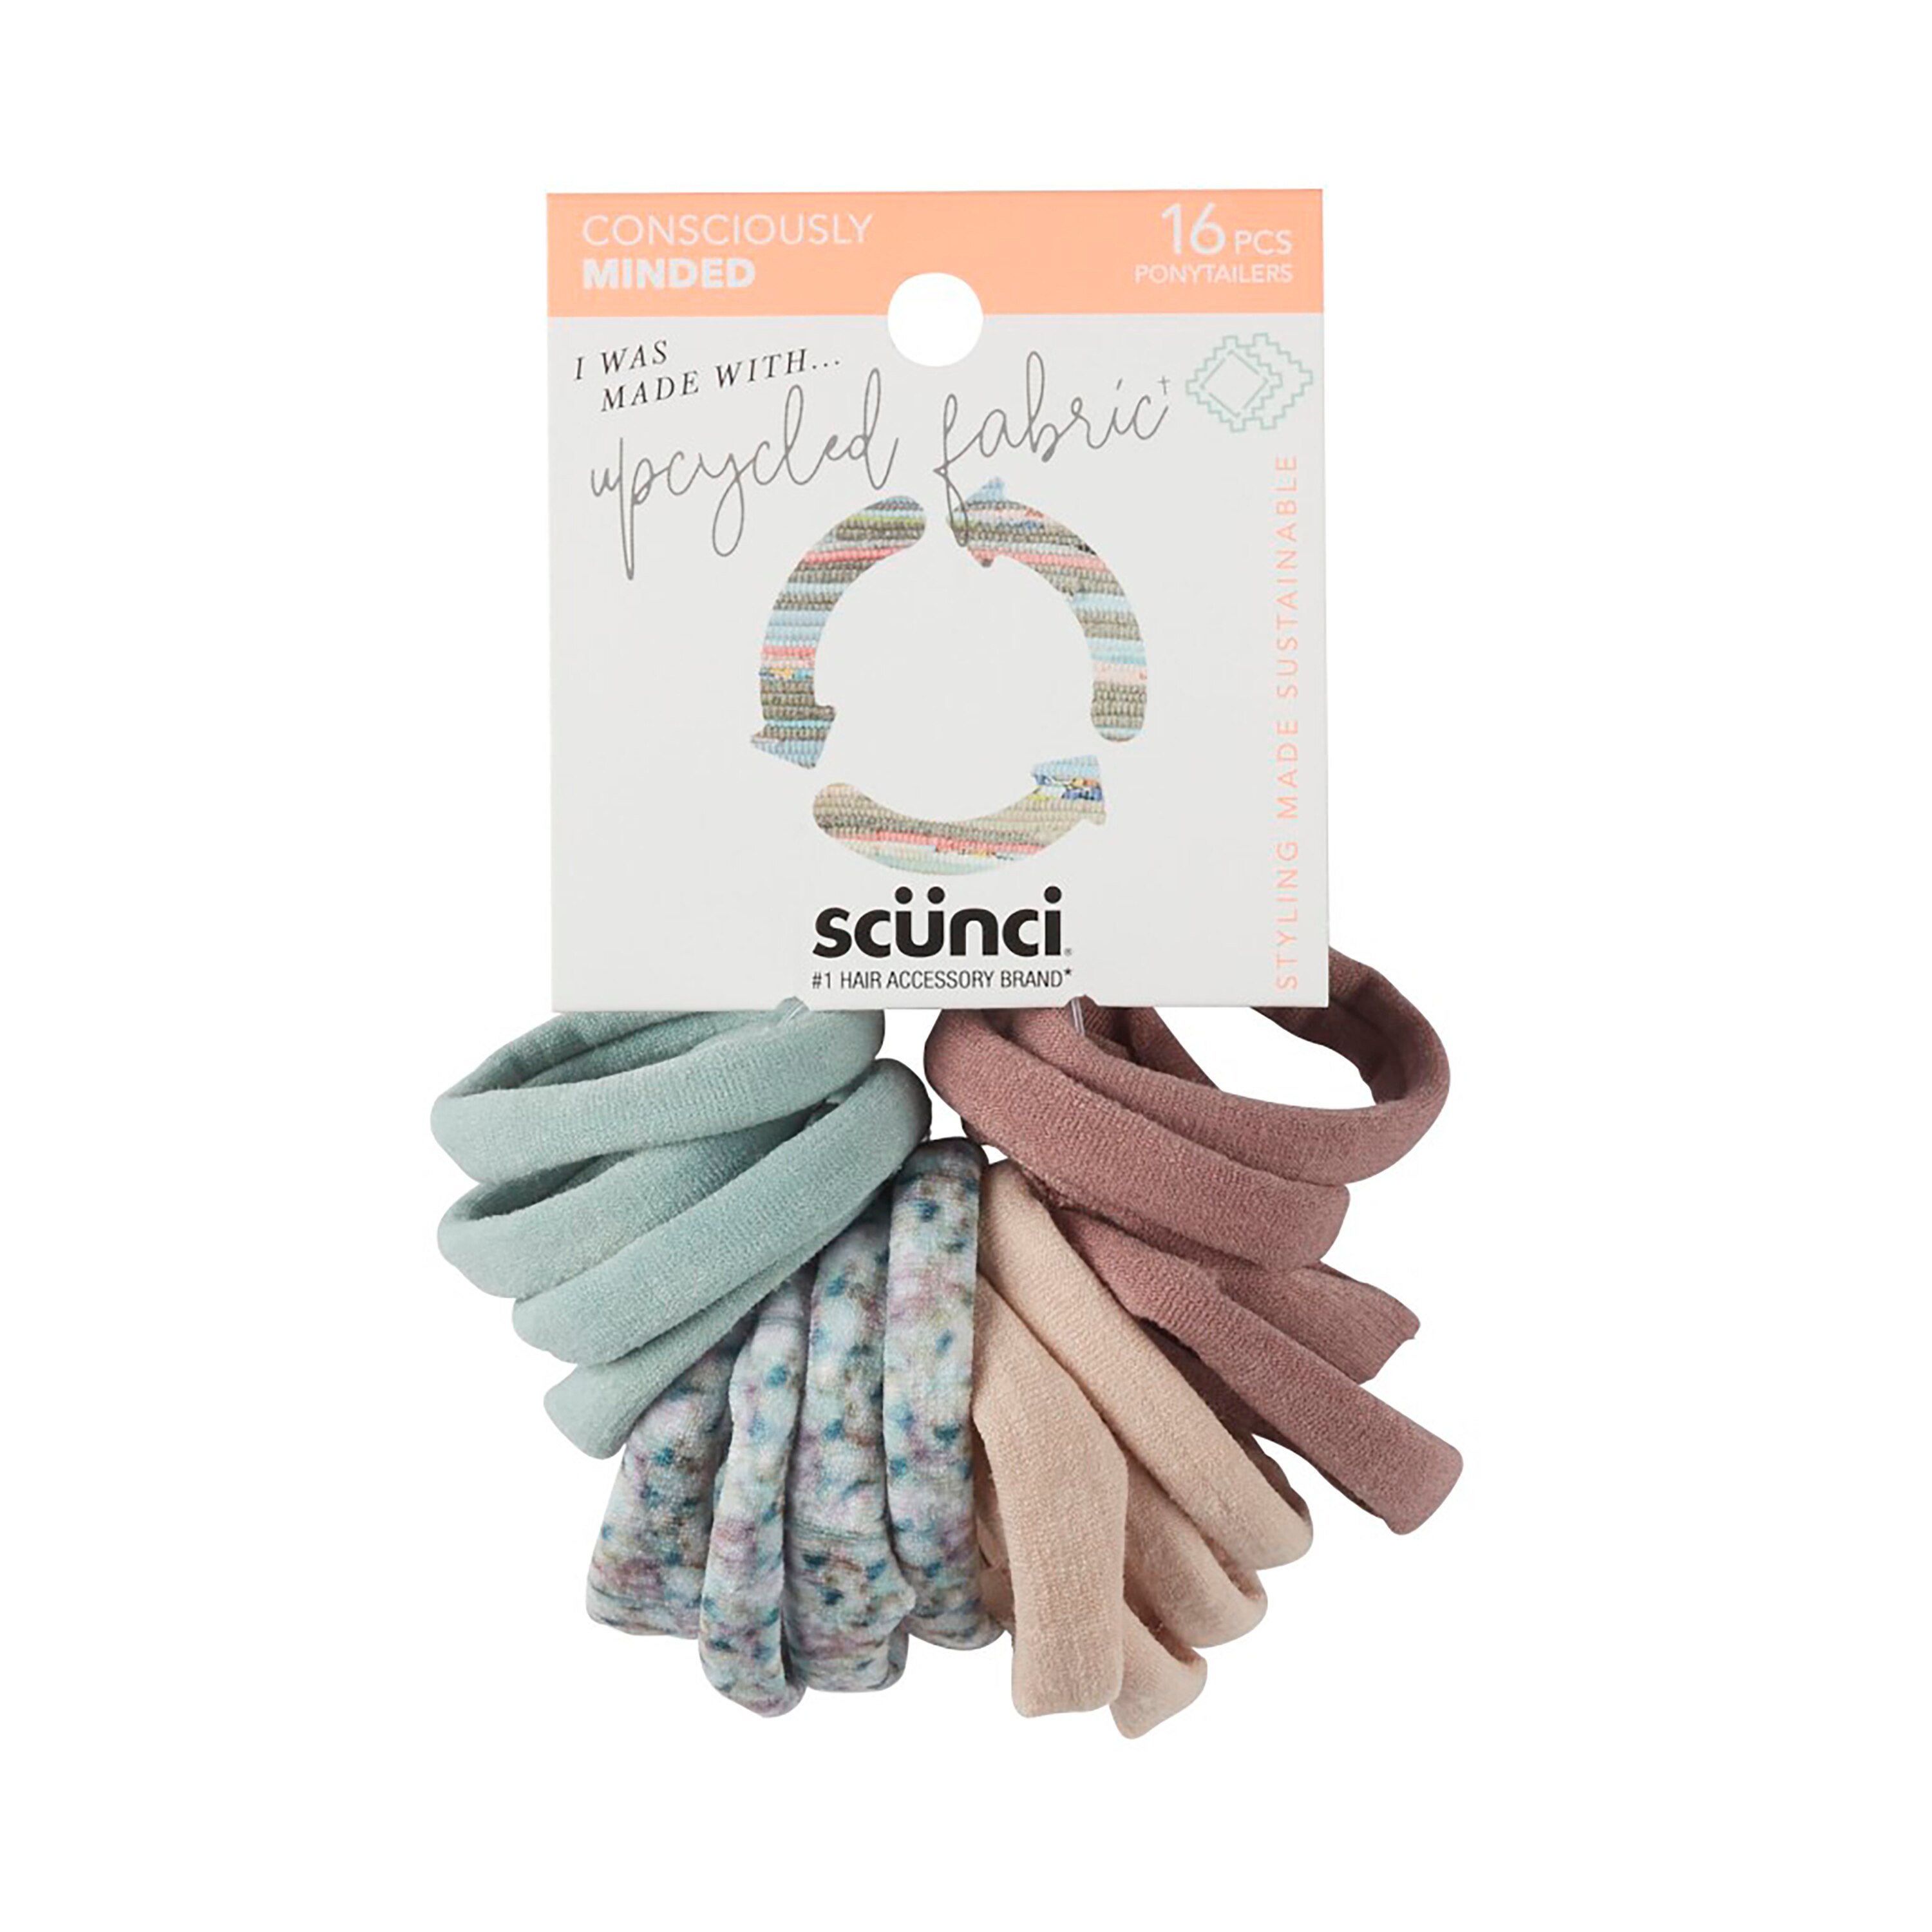 Scunci Consciously Minded Solid And Printed Ponytailers 16pk - 16 Ct , CVS